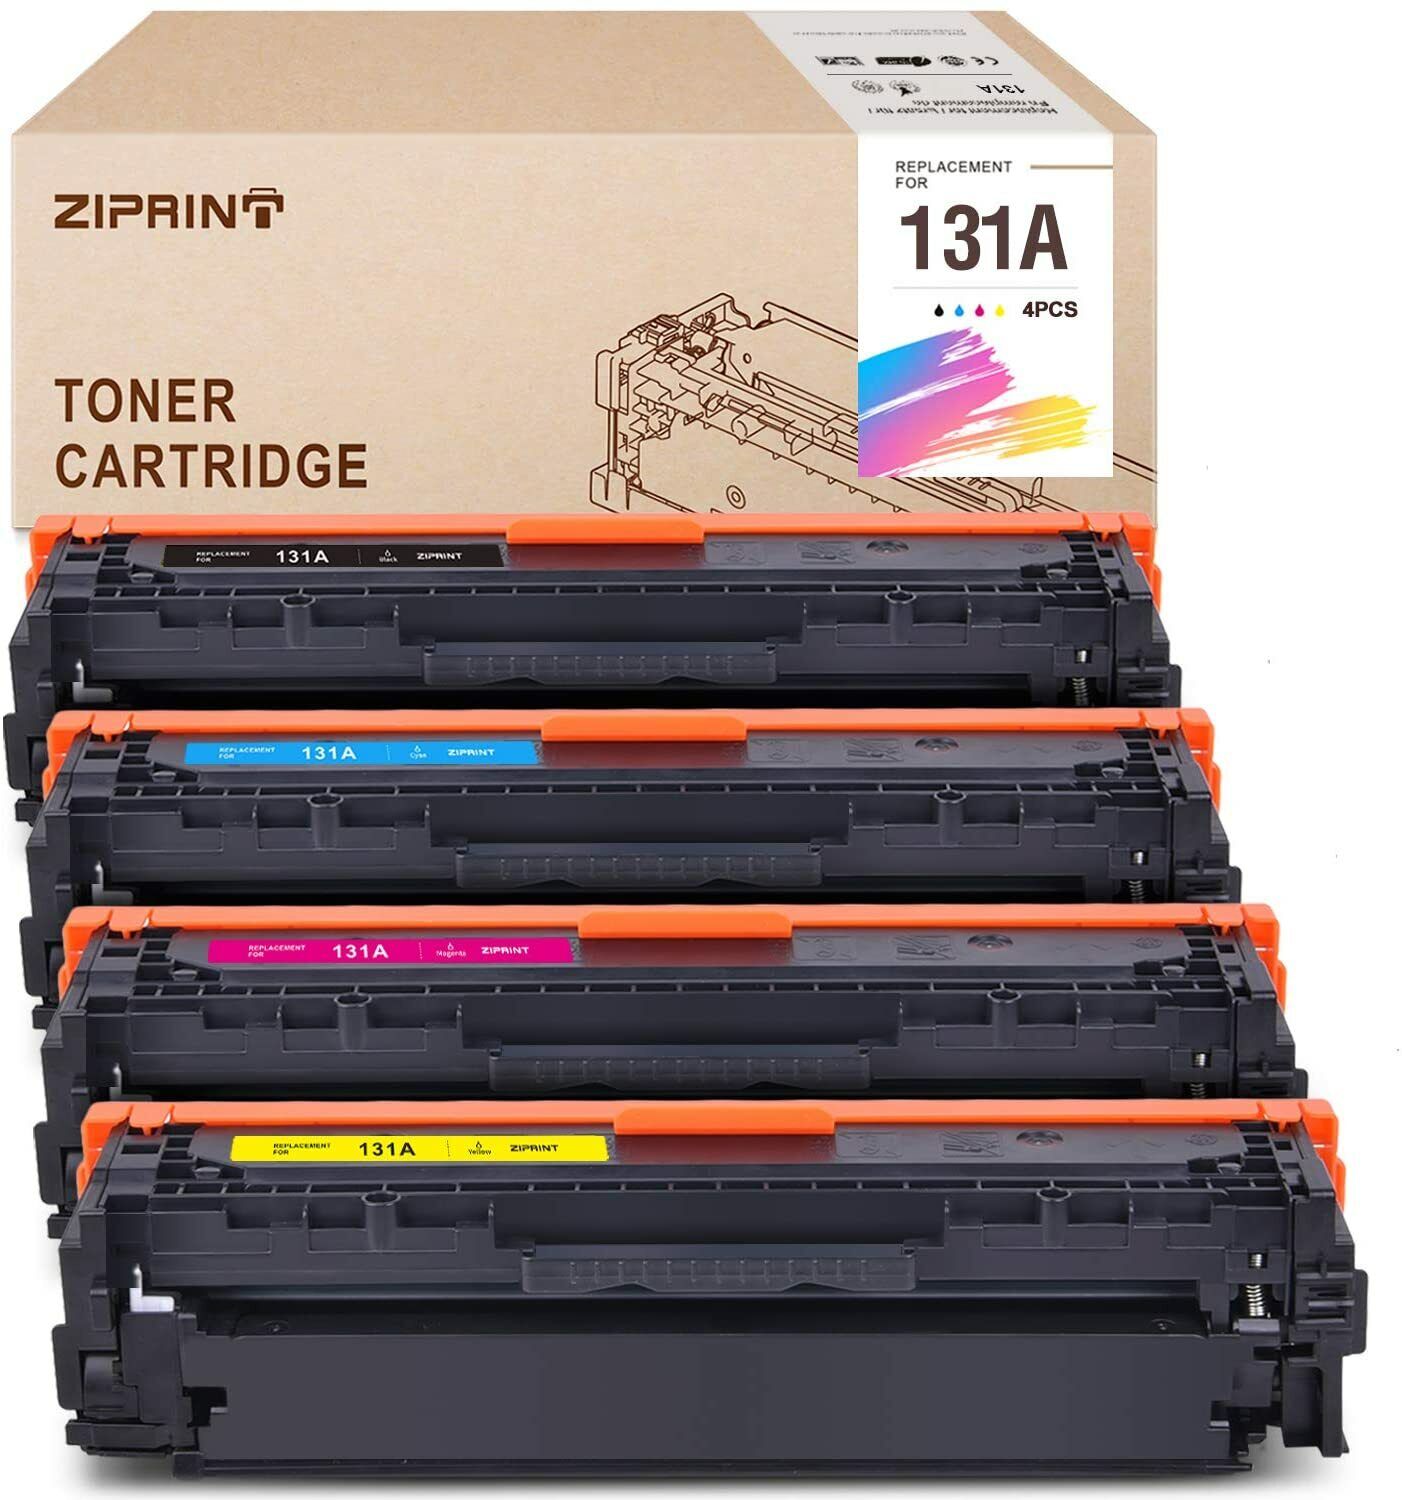 ZIPRINT Remanufactured Toner Cartridge Replacement for HP 131A